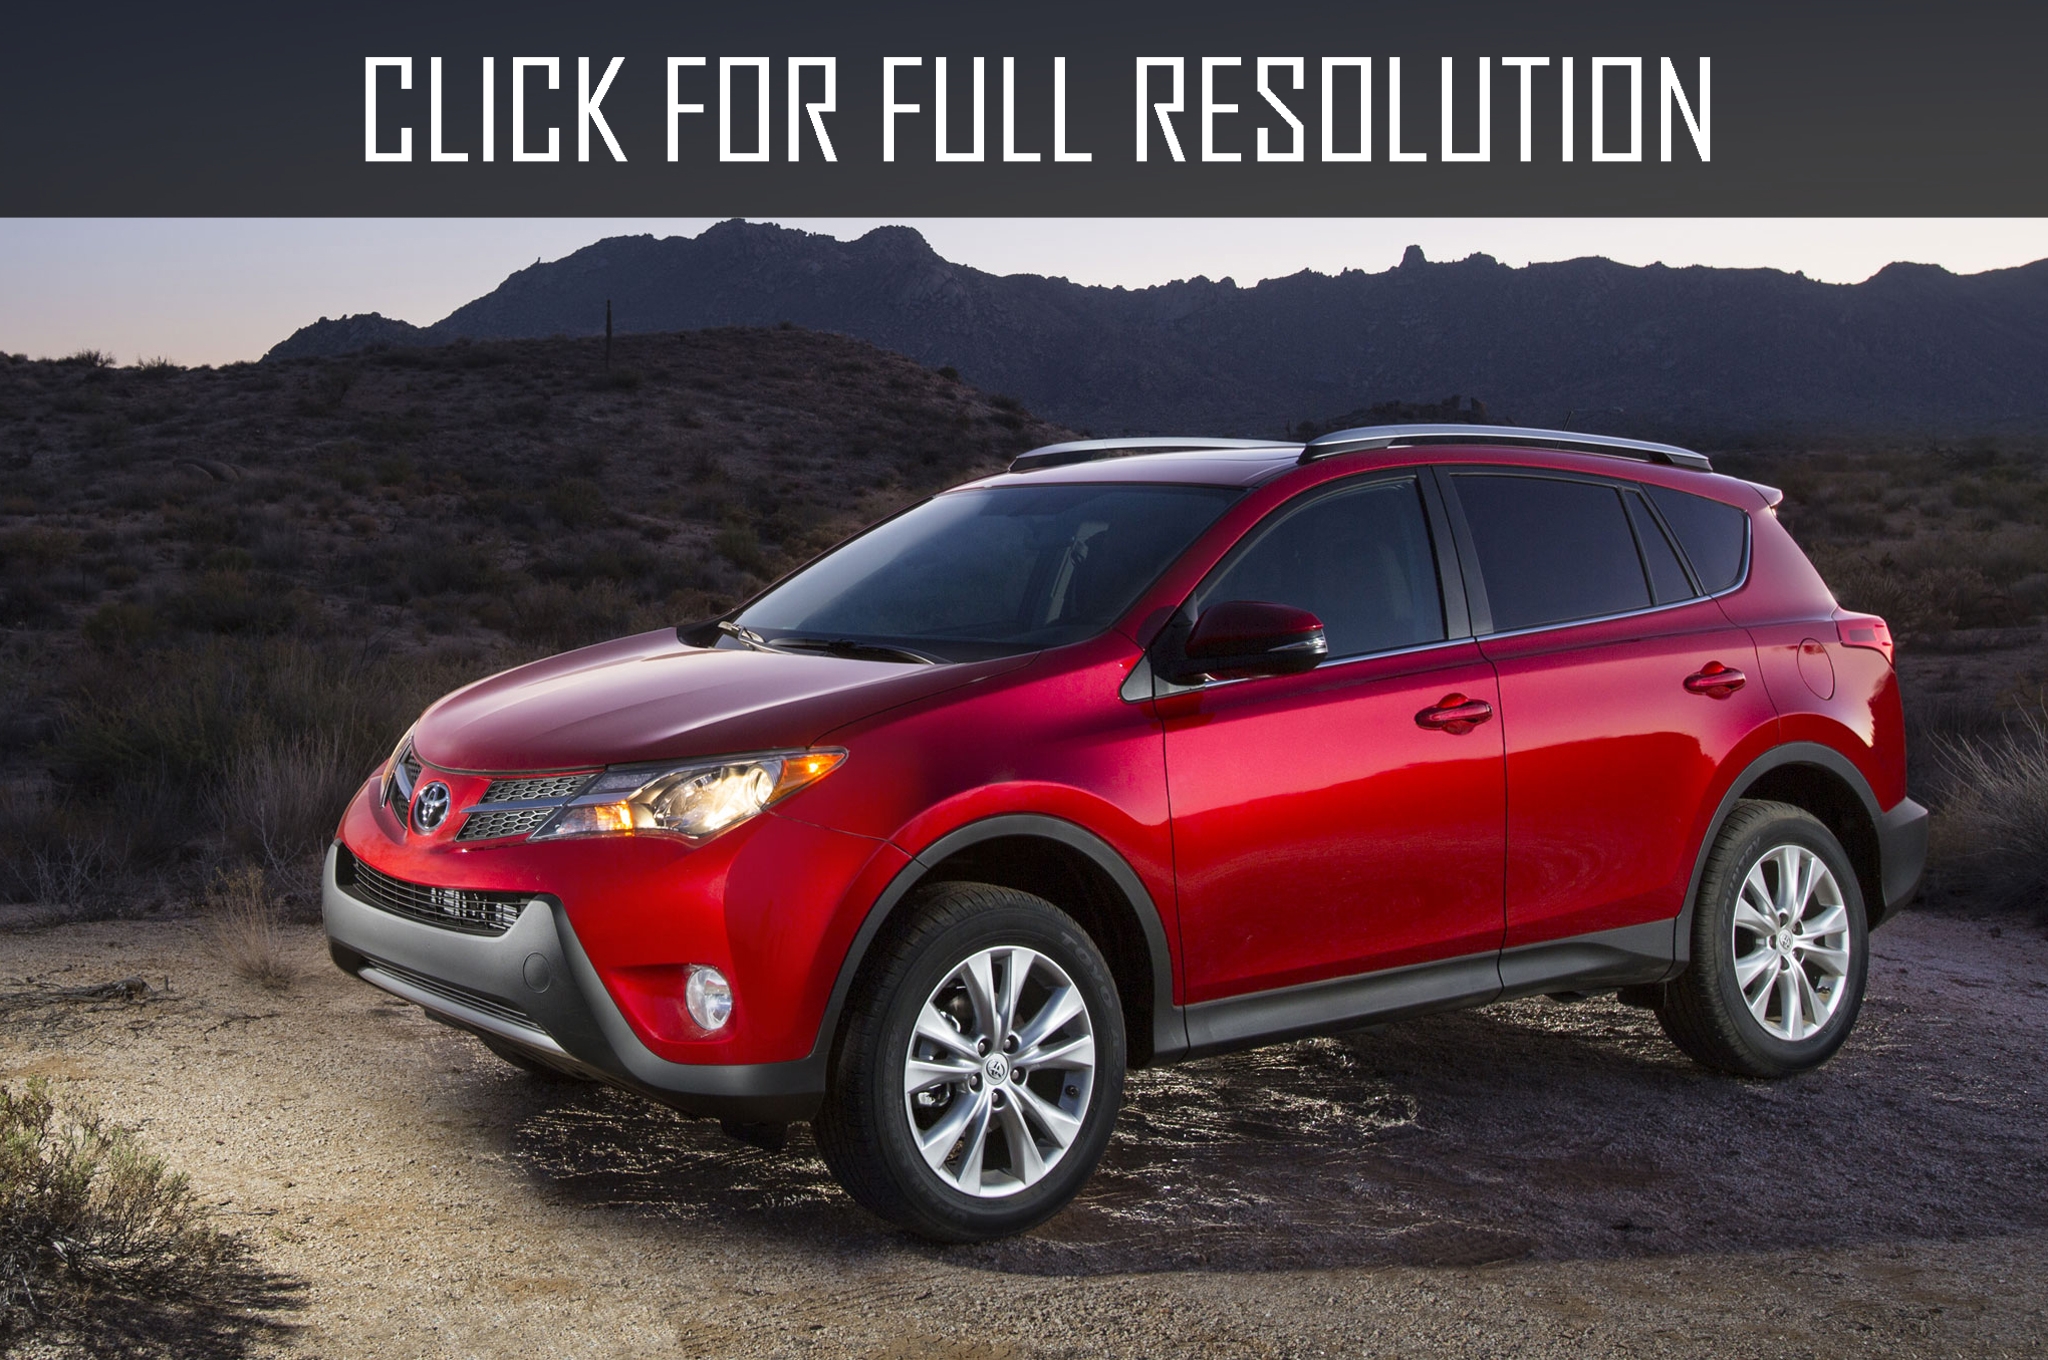 2015 Toyota Rav4 Sport news, reviews, msrp, ratings with